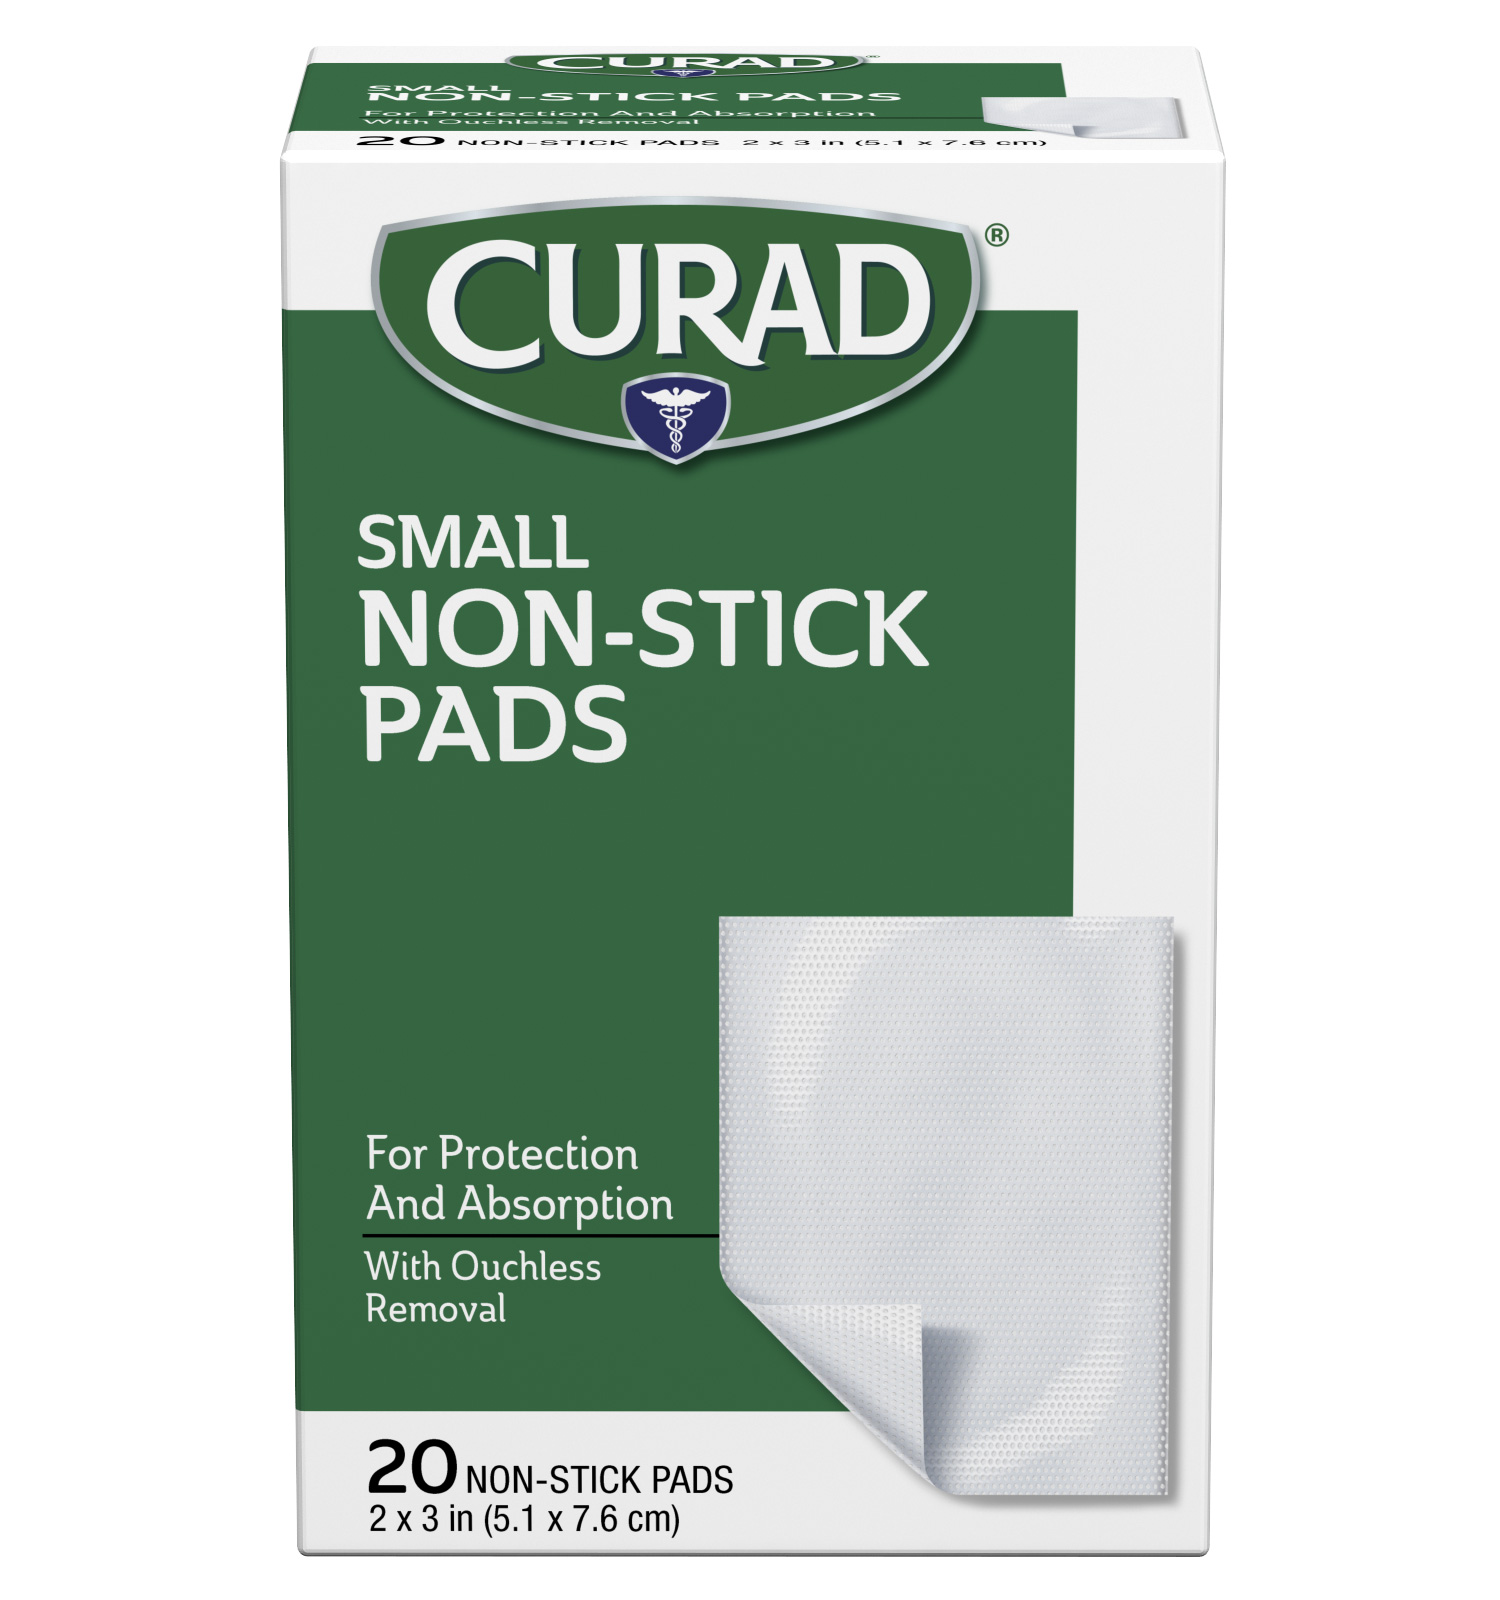 Small Non-Stick Pads, 2 x 3, 20 count